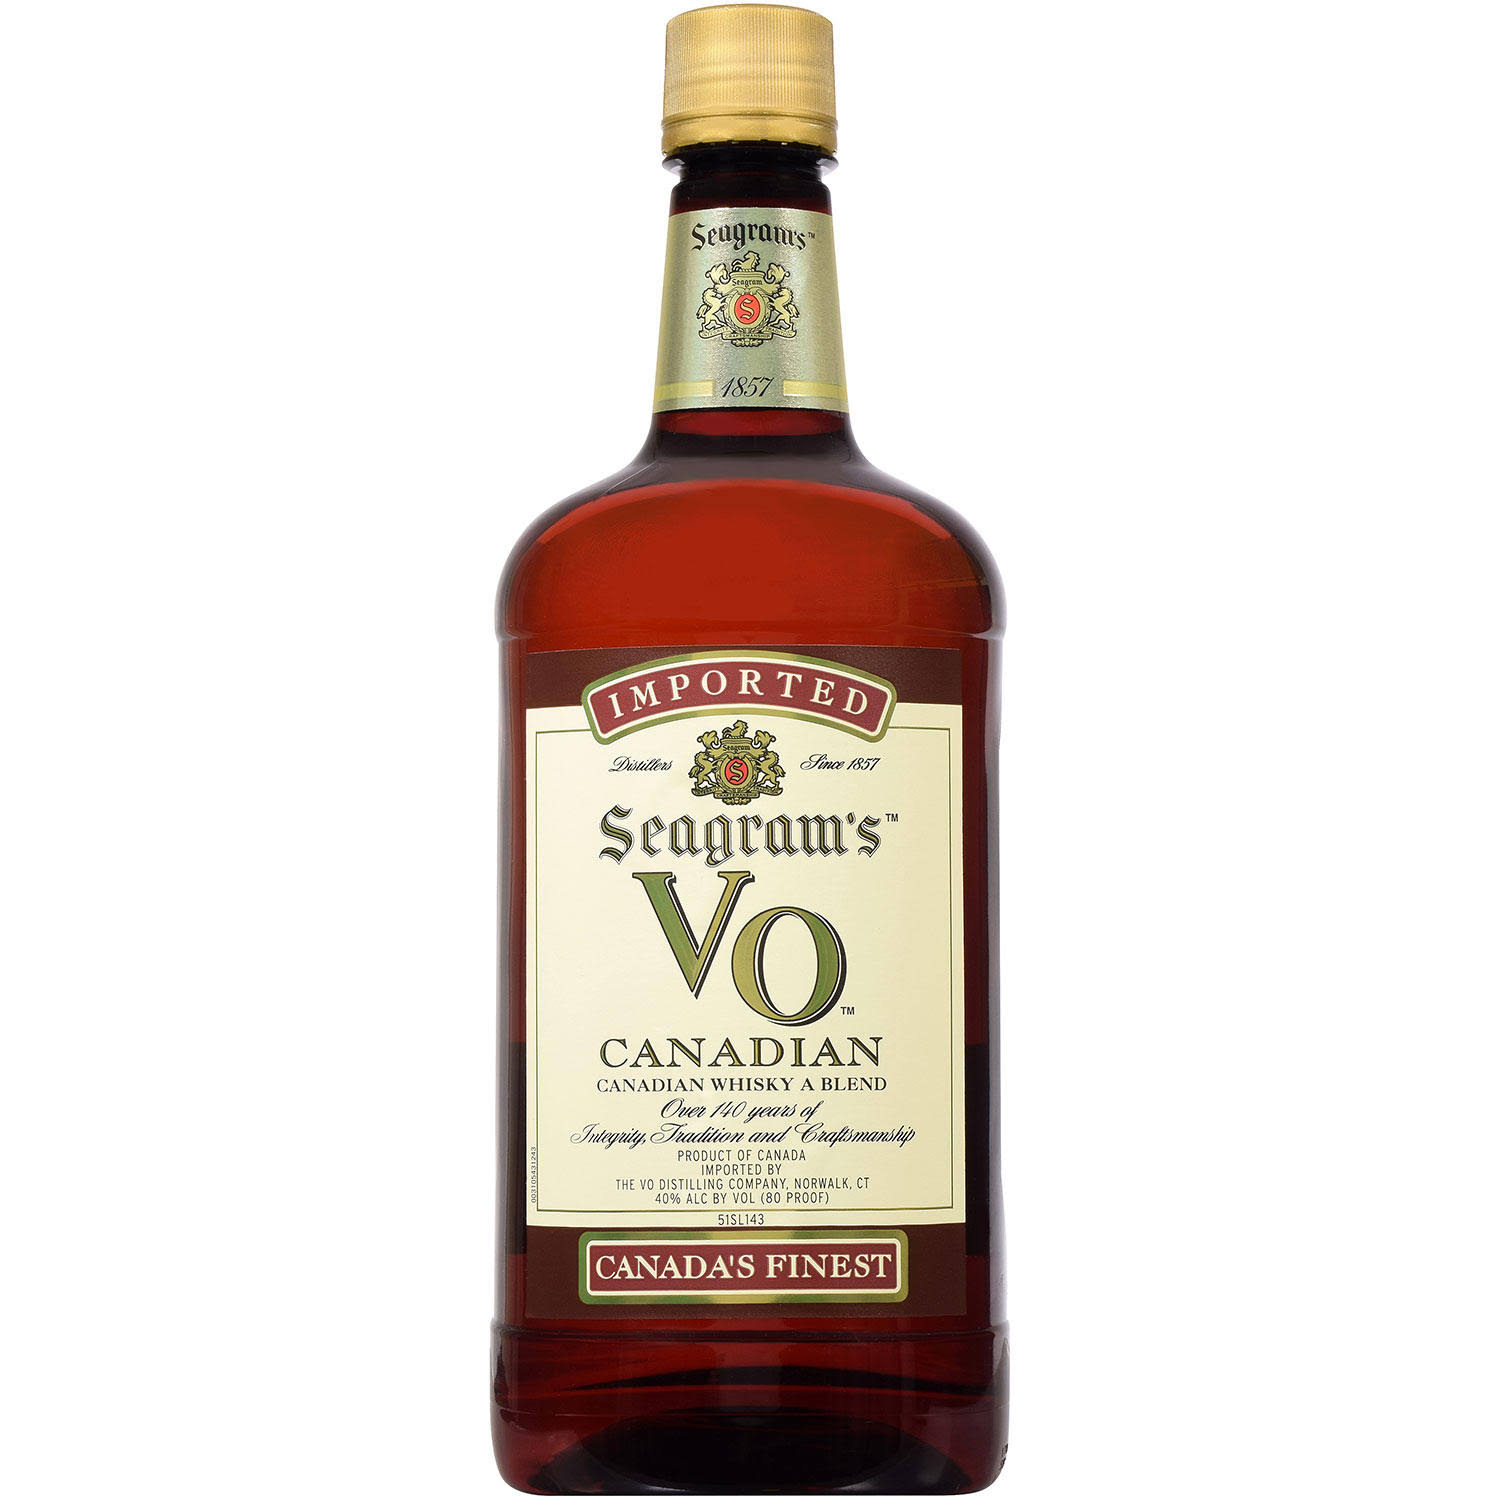 Seagram's Vo Canadian Whisky (1.75L)